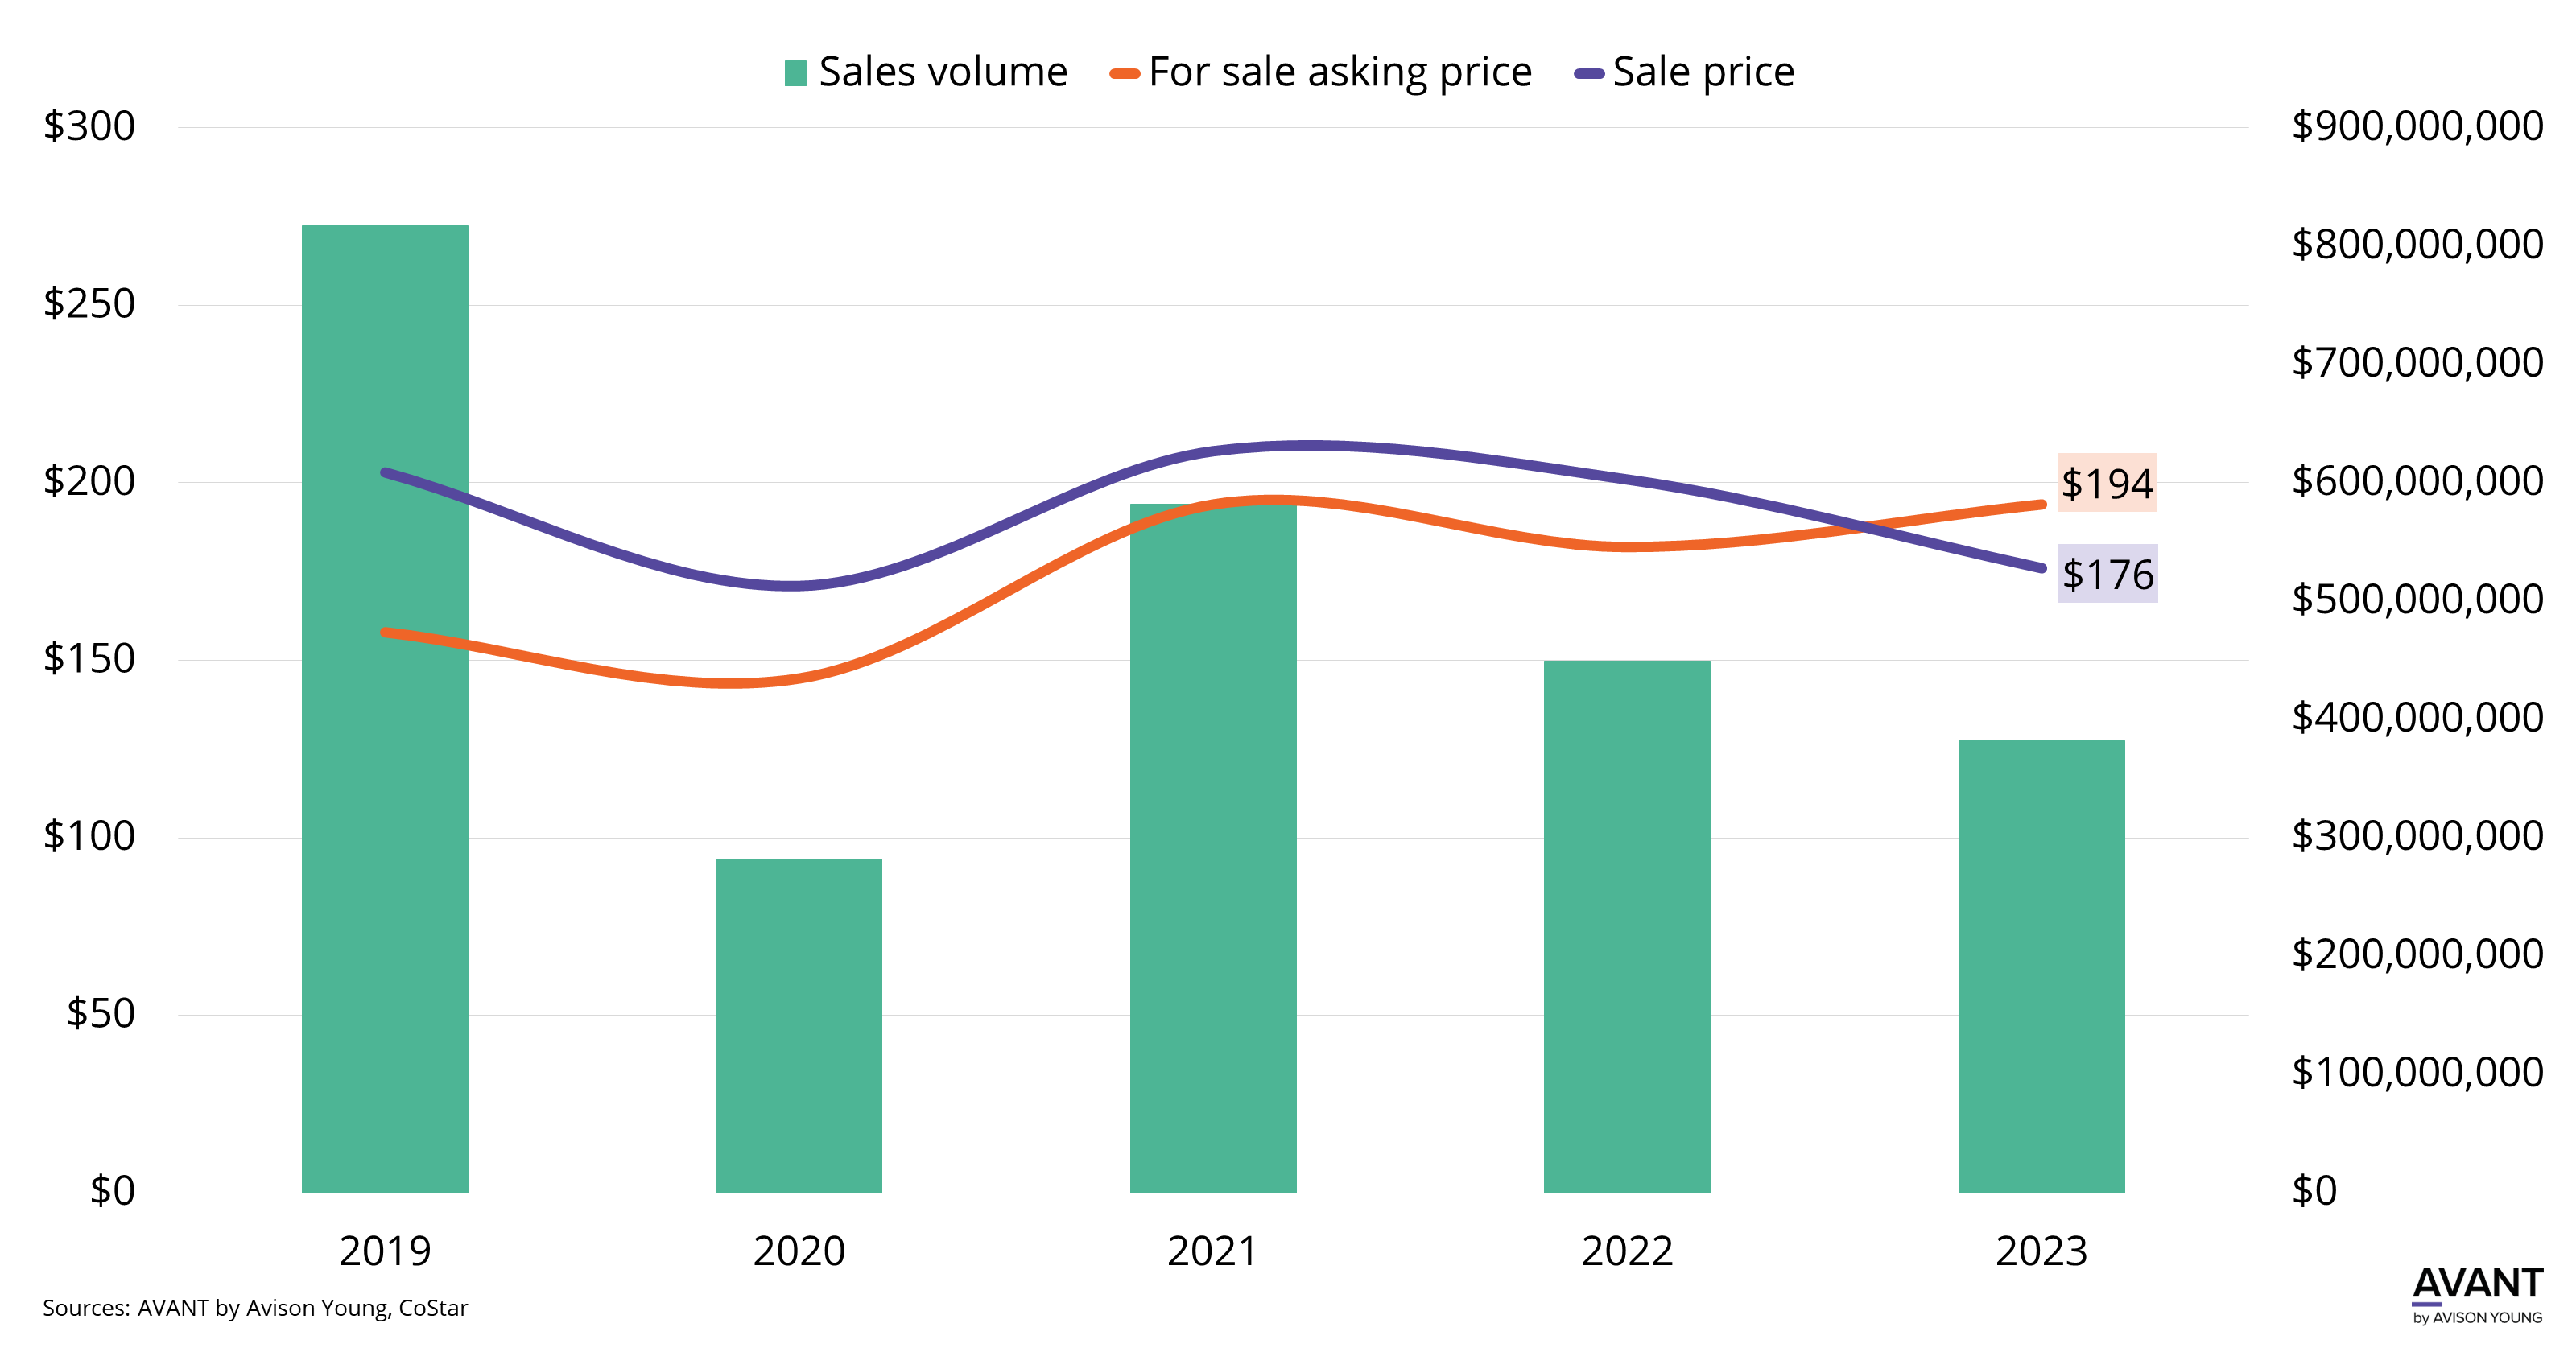 graph of Tampa's sales volume, for sale asking price and sale price of office buildings from 2019 to 2023